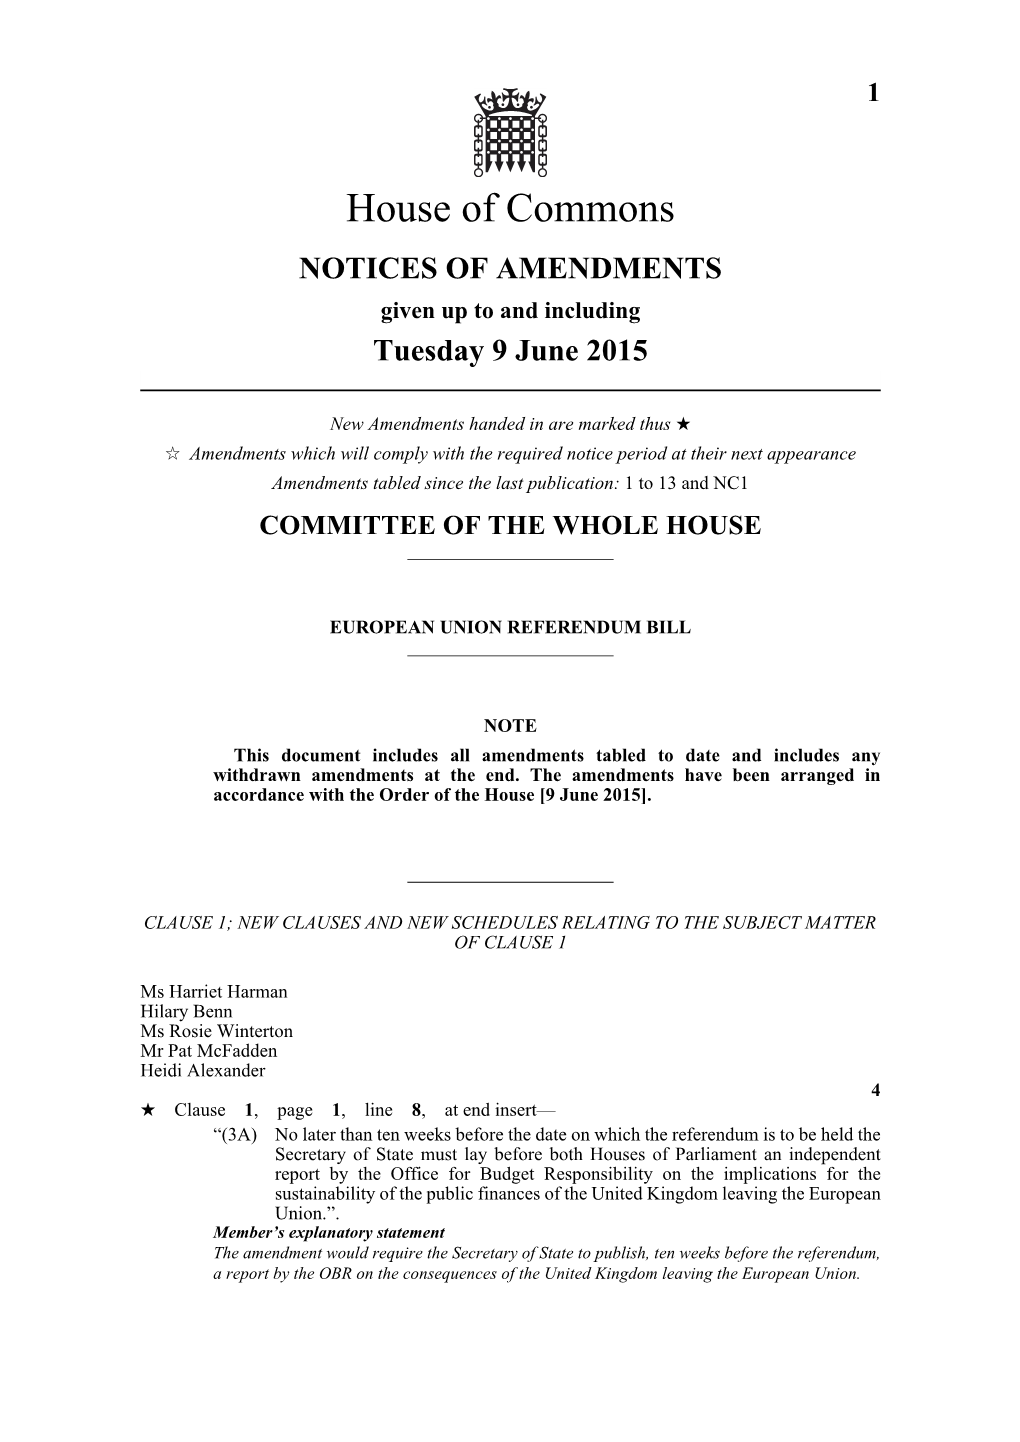 AMENDMENTS Given up to and Including Tuesday 9 June 2015